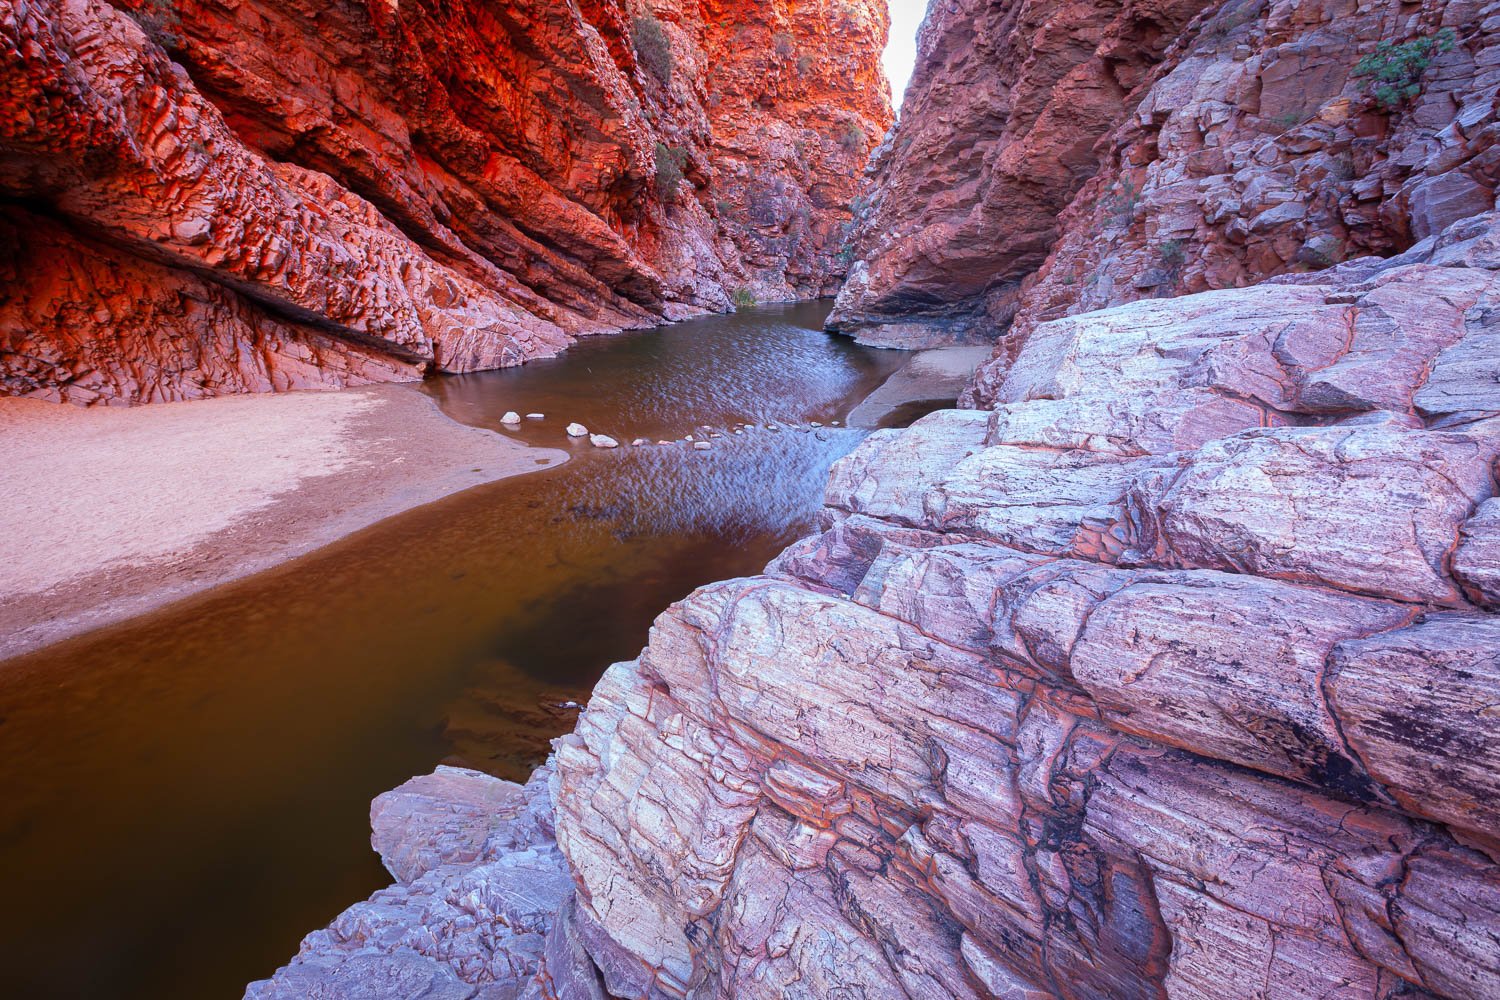 A beautiful area under the high mountain walls with a radish shade, and a small watercourse below the walls, Emily Gap, West MacDonnell Ranges - Northern Territory